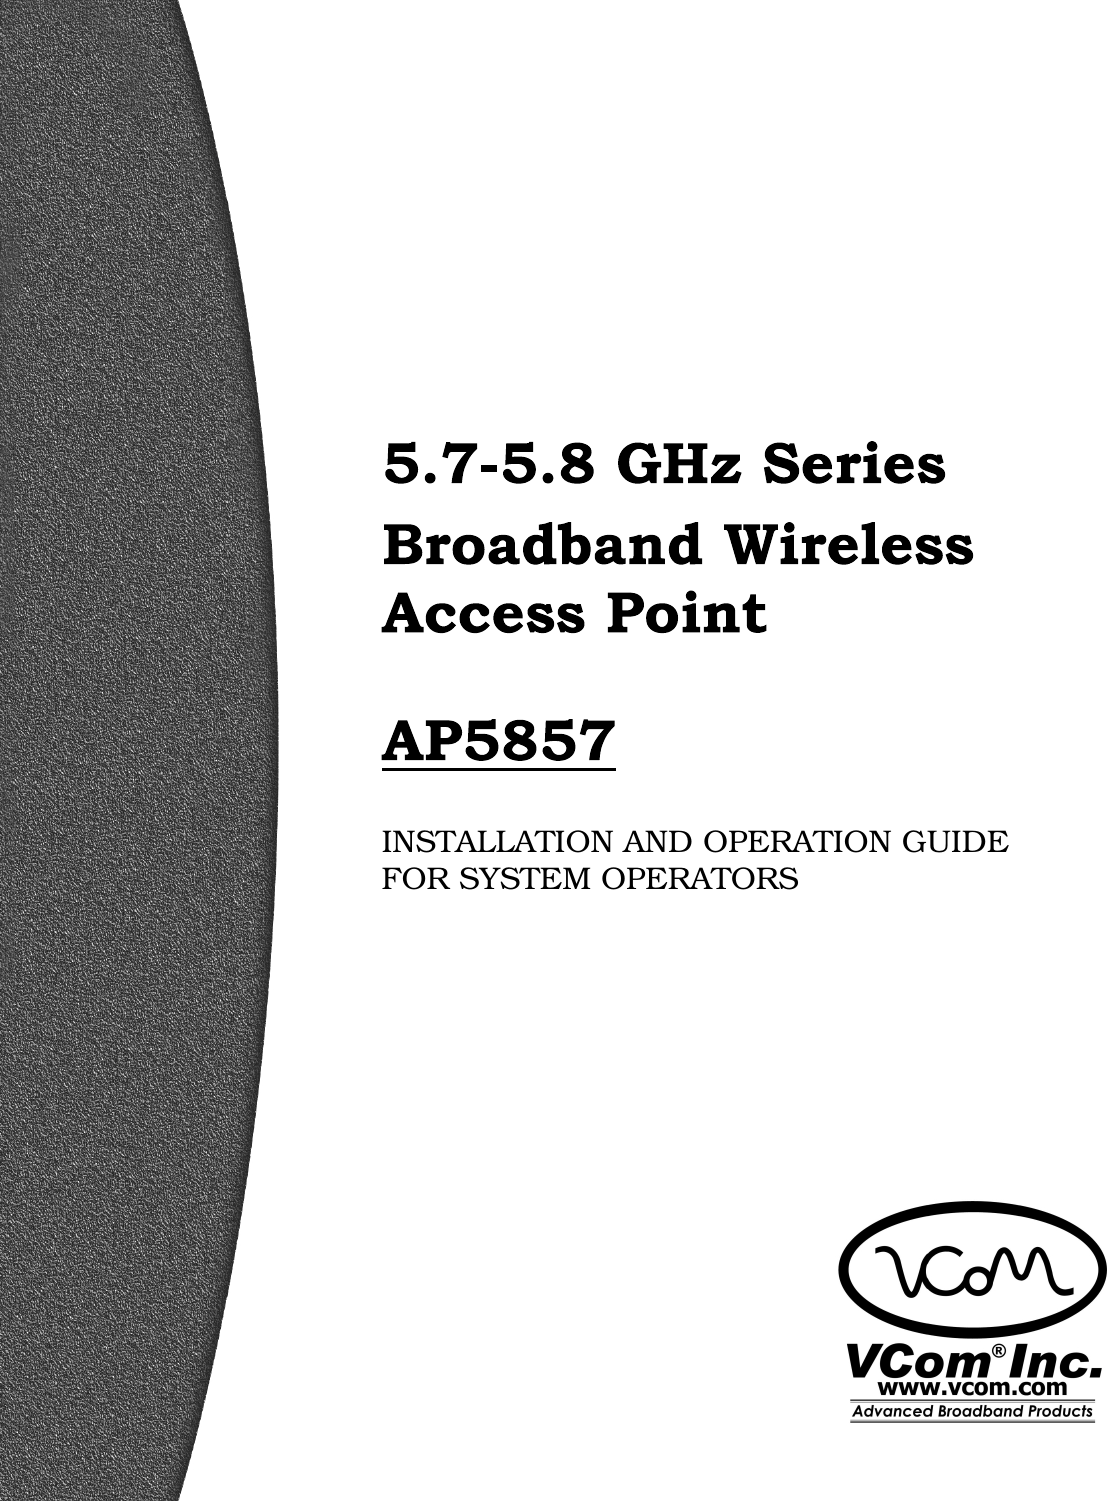      INSTALLATION AND OPERATION GUIDE  FOR SYSTEM OPERATORS    